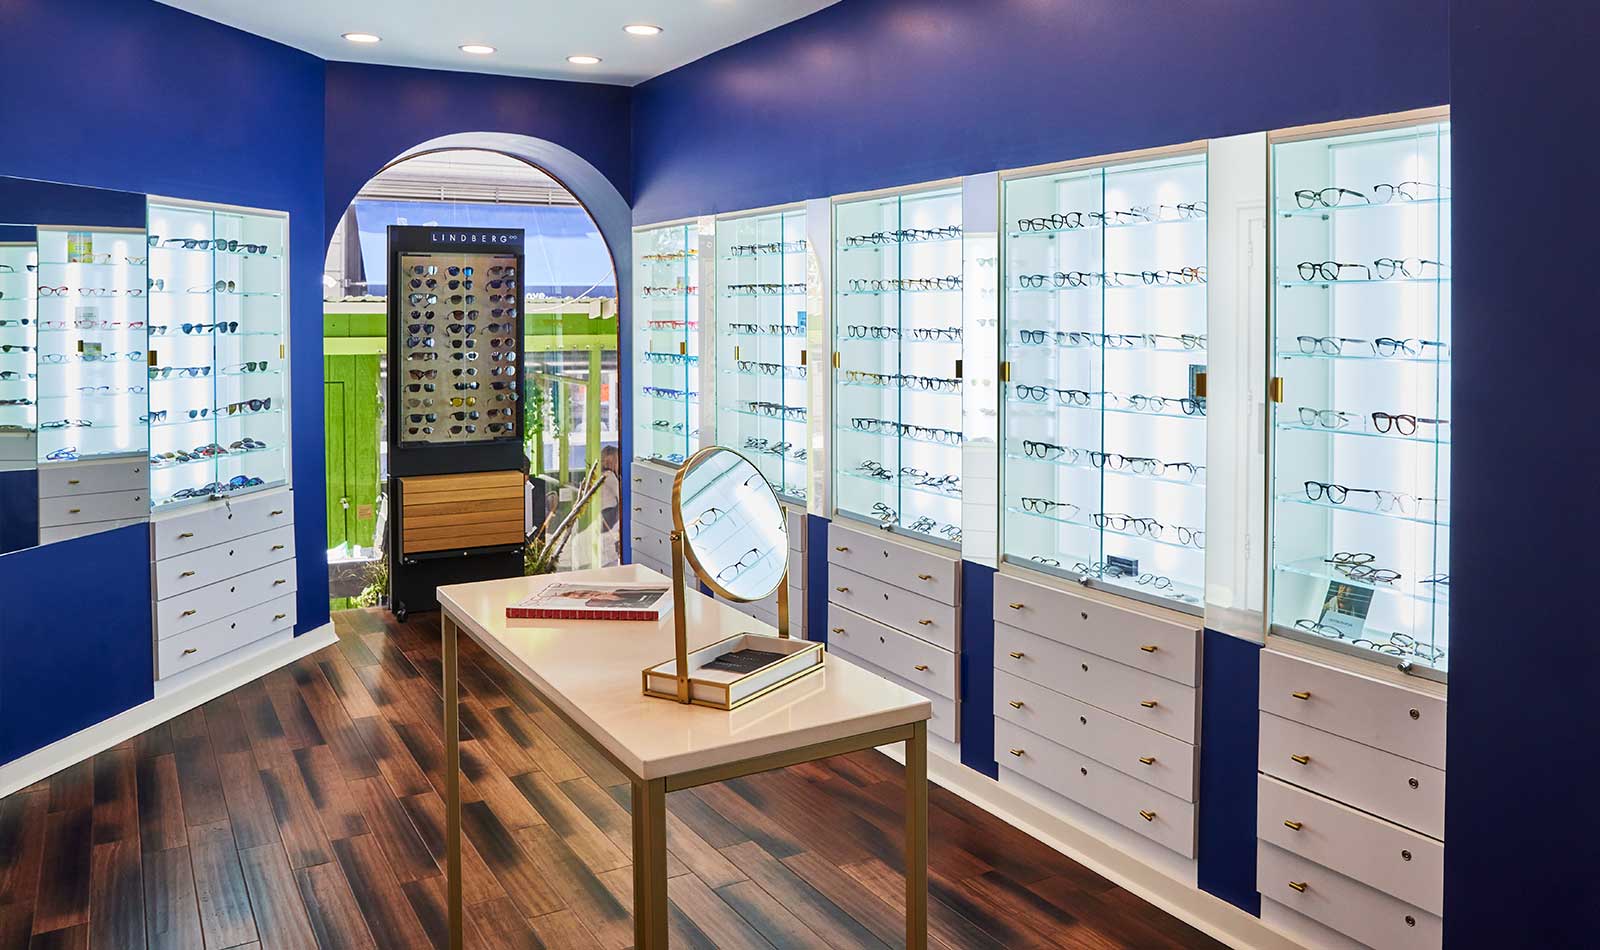 Schedule your eye exam and browse eyeglasses and sunglasses at InnerVision Eyewear in Rittenhouse Square.